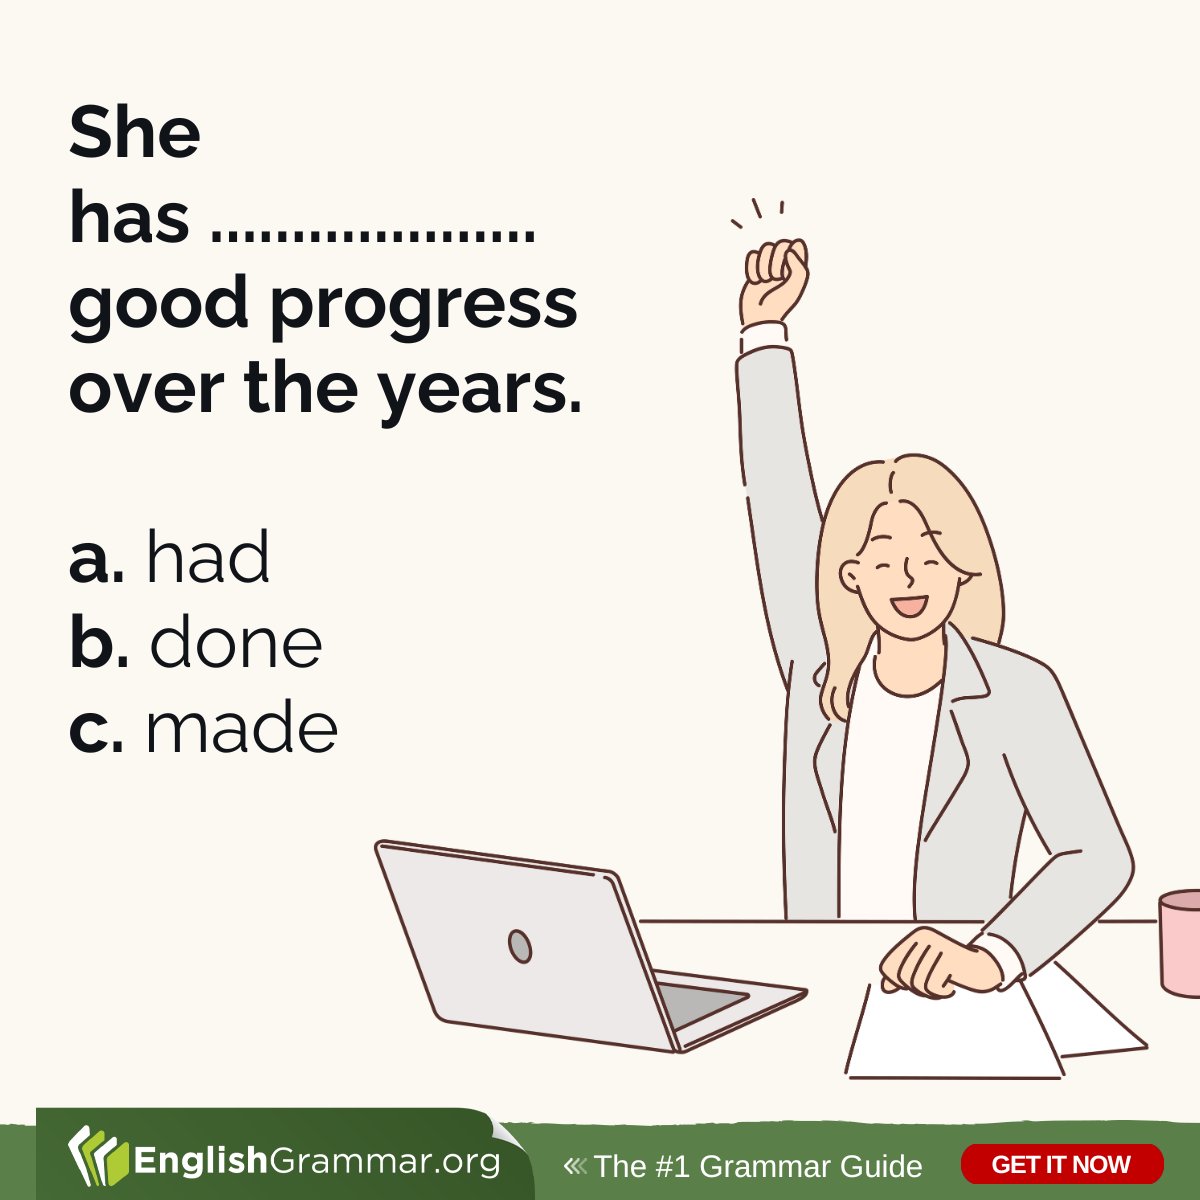 Anyone? Find the right answer here: englishgrammar.org/collocations-w… #grammarupdates #grammar #writing